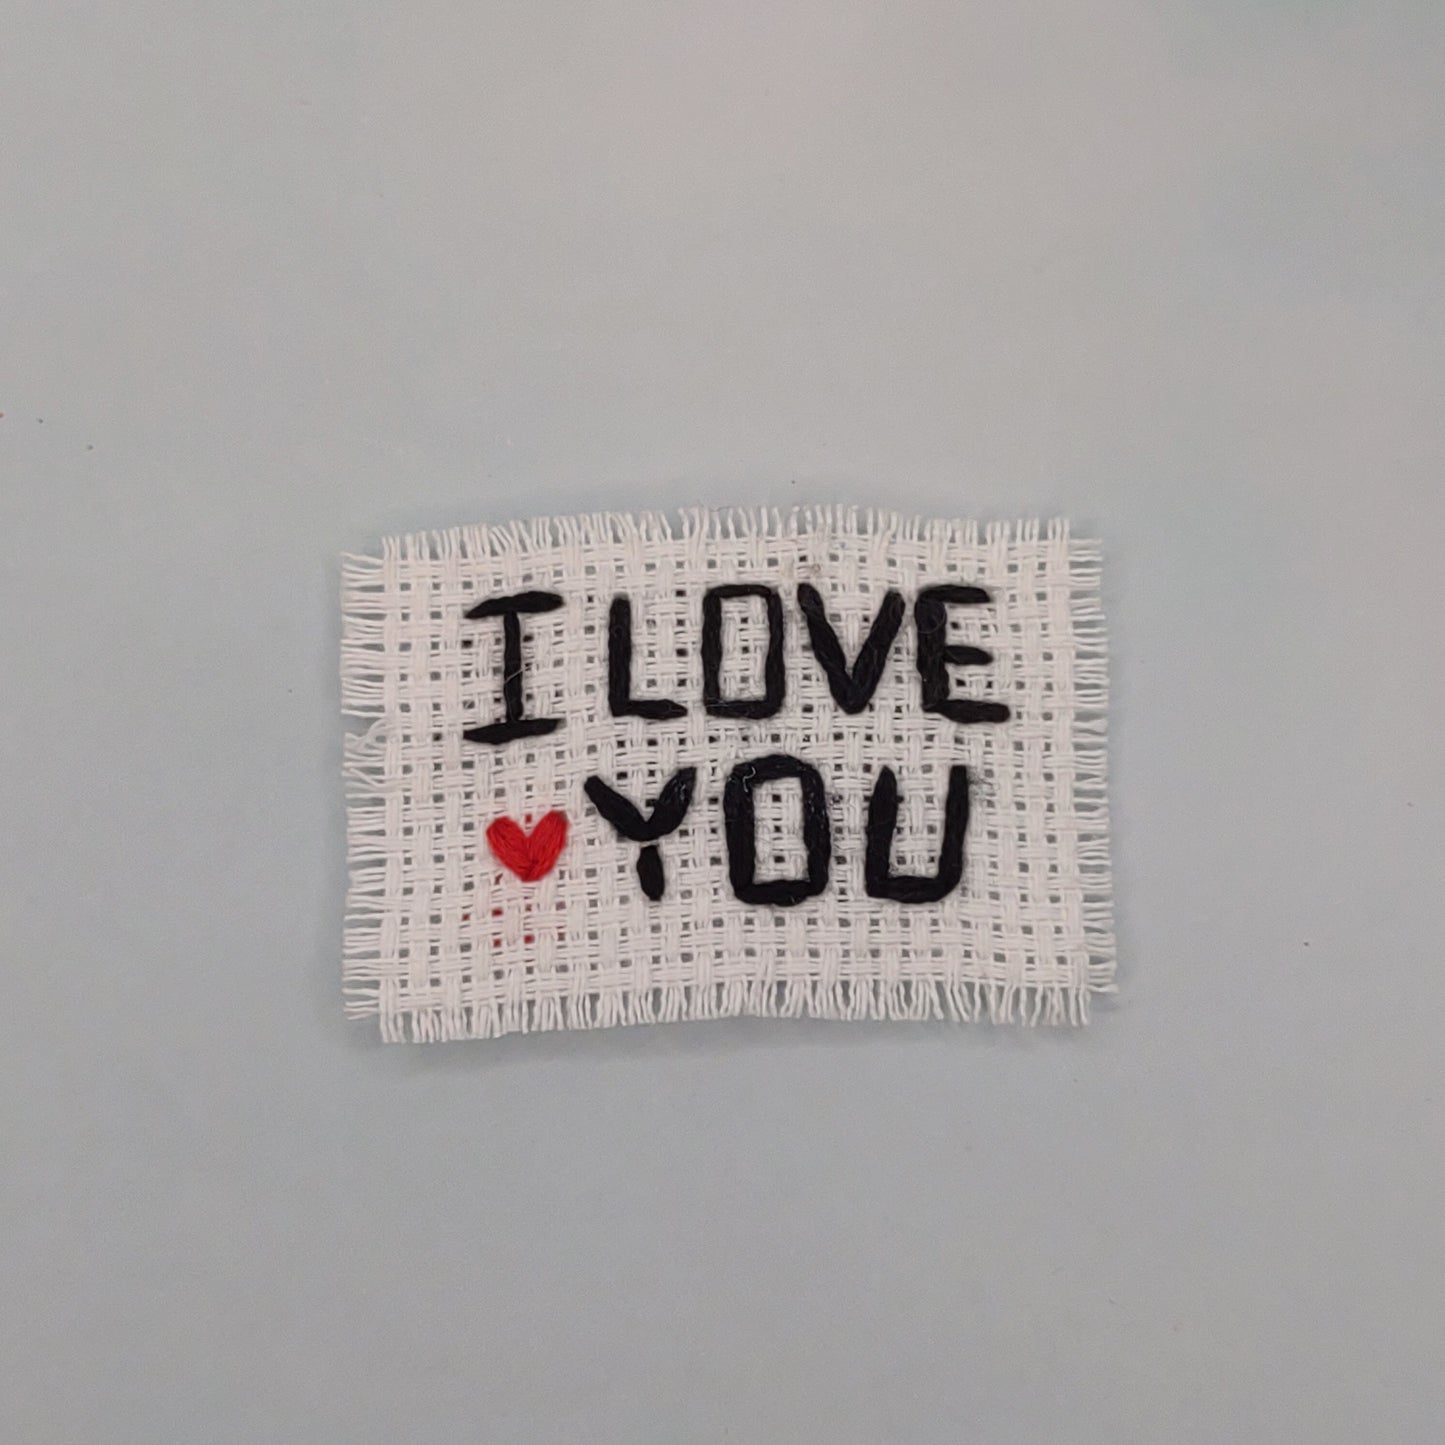 I LOVE YOU -Caring Magnets- Handmade Embroidery